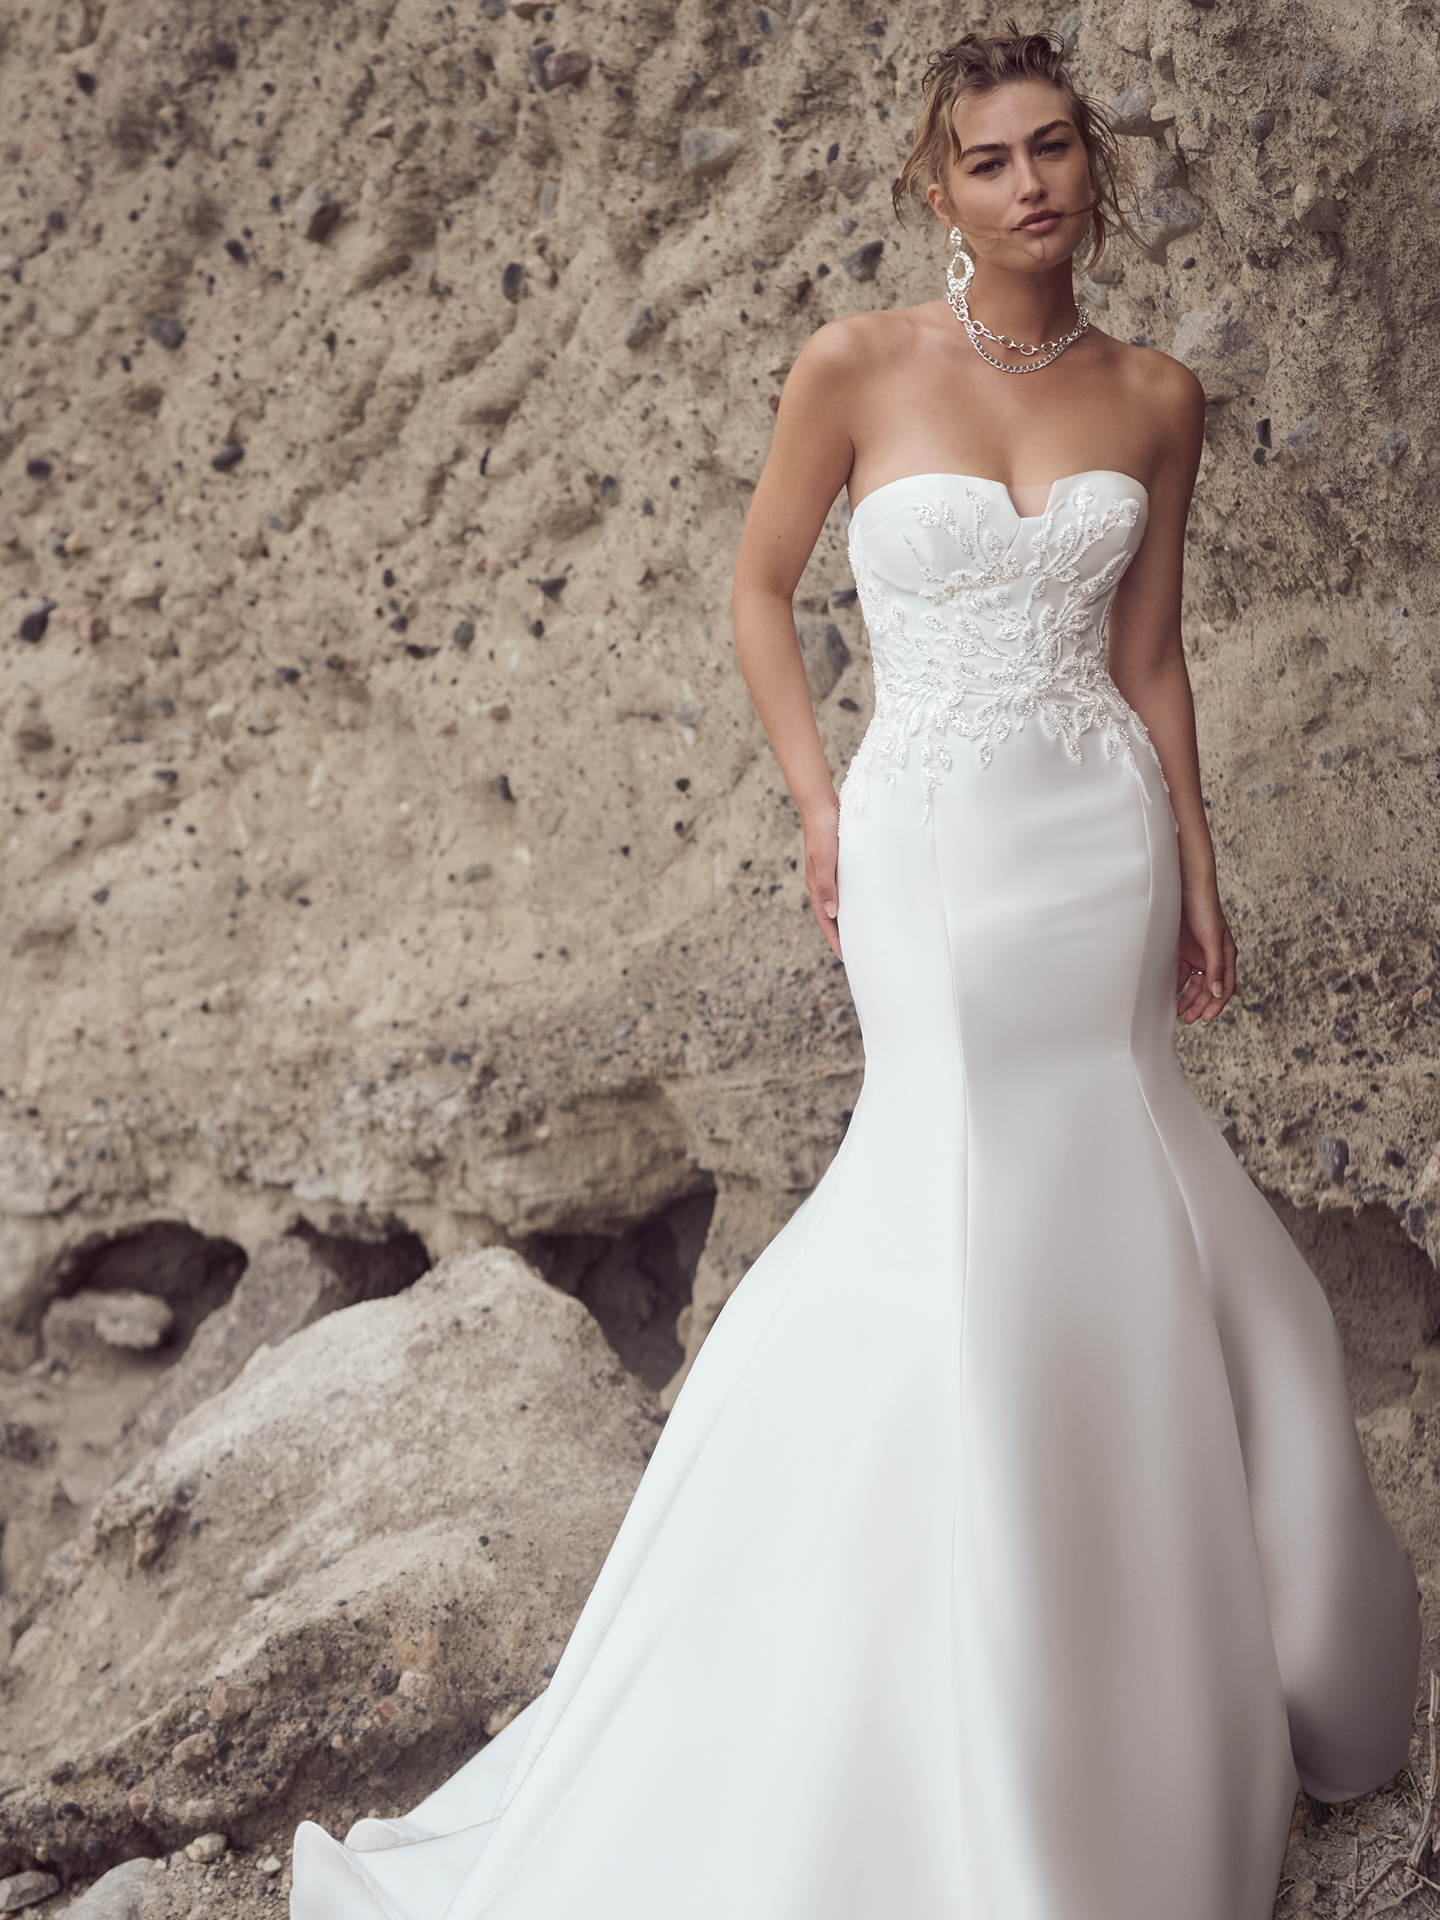 Bride In Reception Wedding Dress Called Italiana Lane By Sottero And Midgley